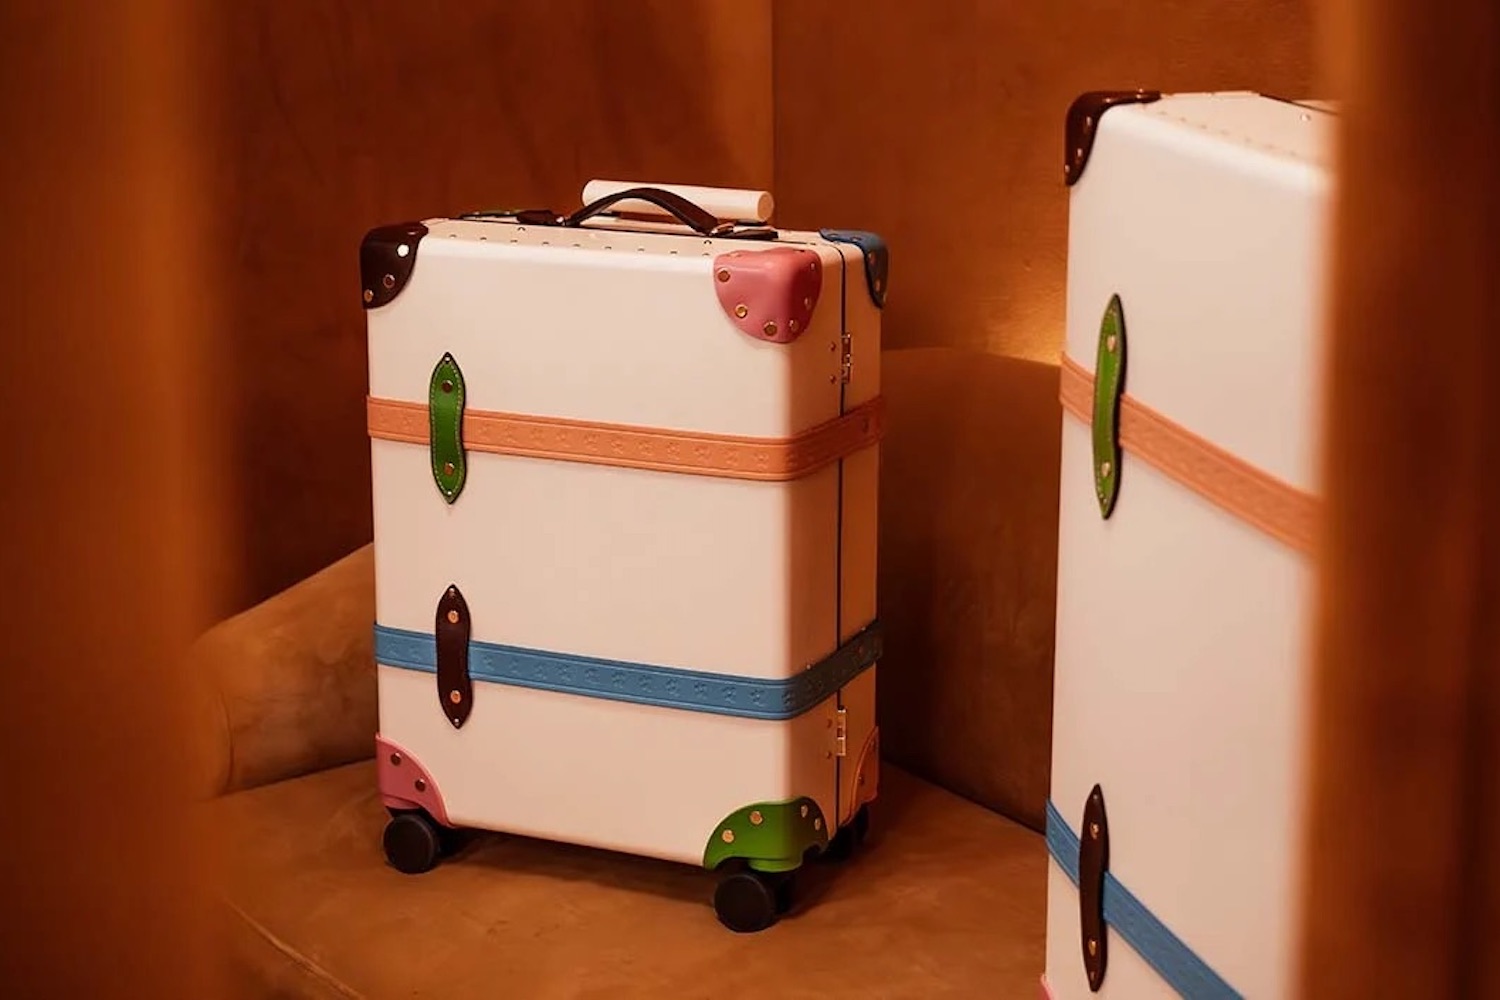 a piece of luggage from the GOLF le FLEUR* x Globe-Trotter collection